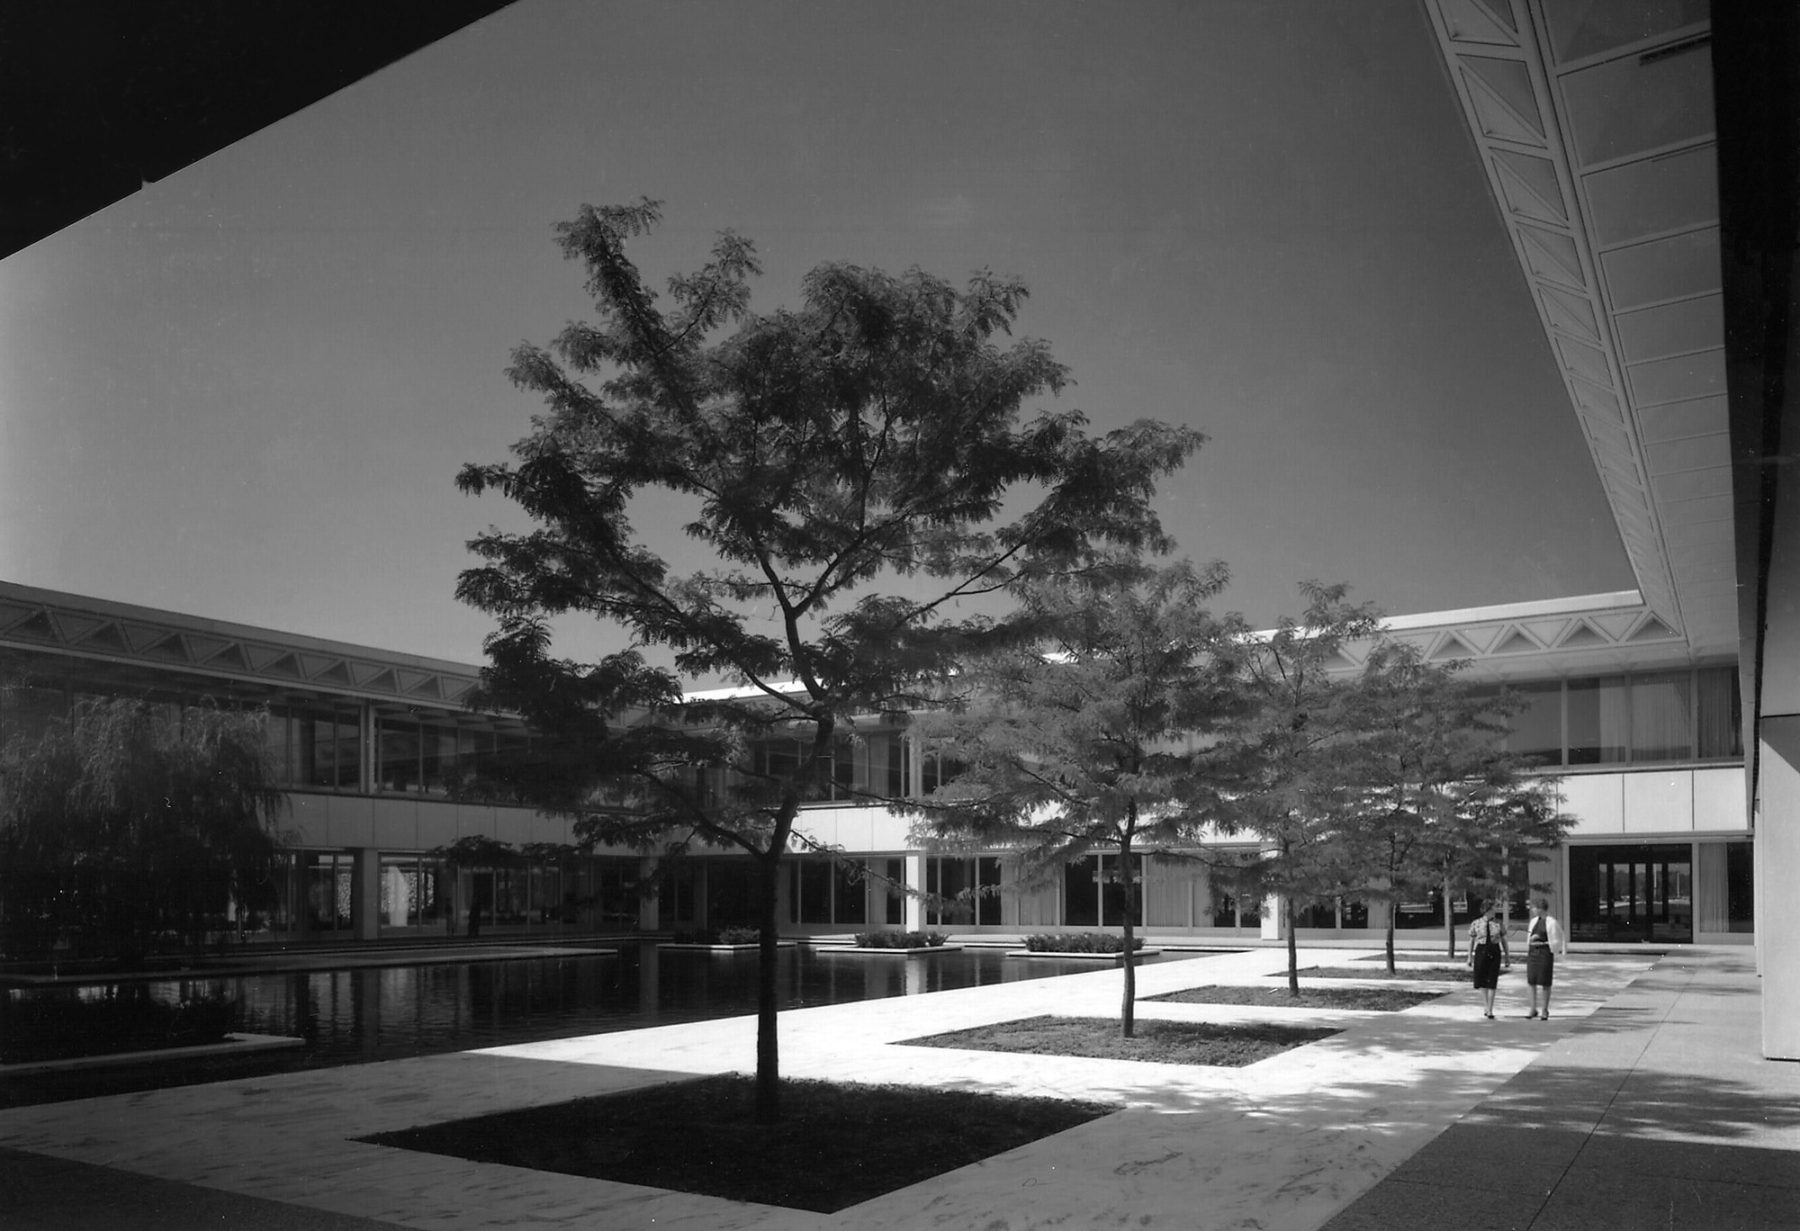 Courtyard of the Upjohn Company General Office Building